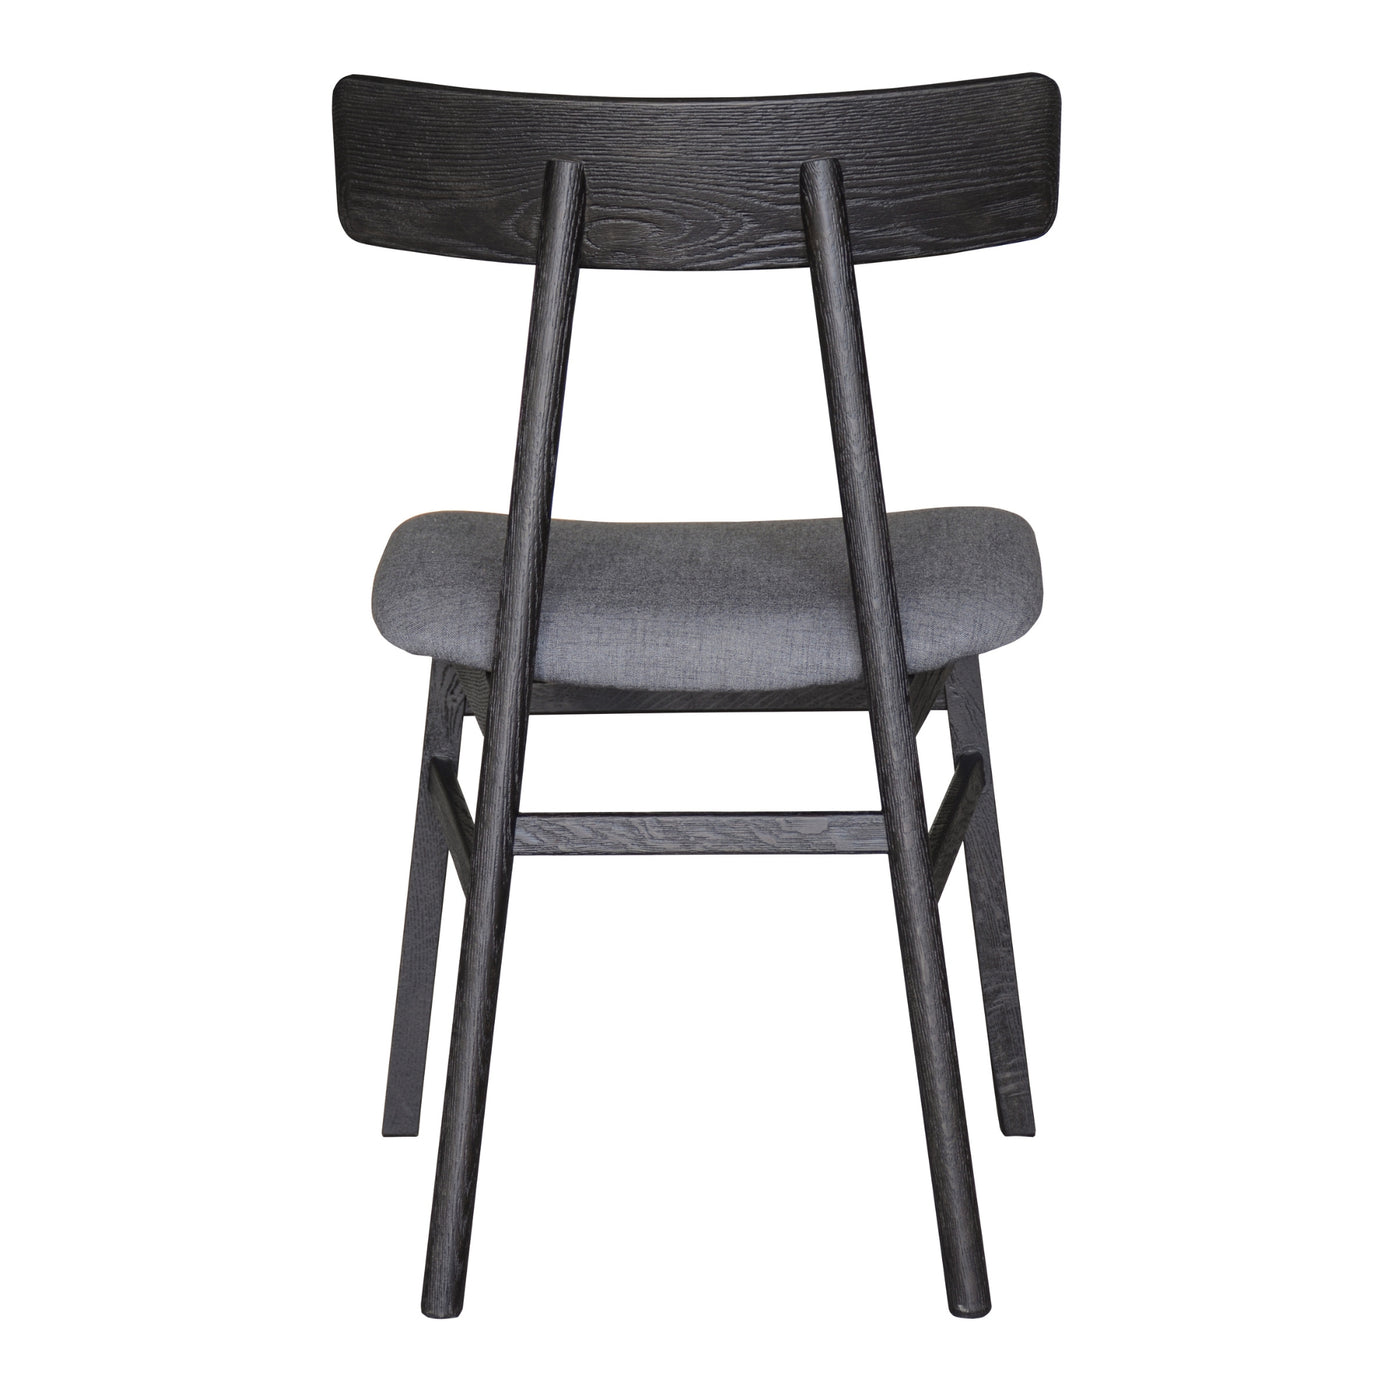 Claire Dining Chair Set of 4 Solid Oak Wood Fabric Seat Furniture - Black